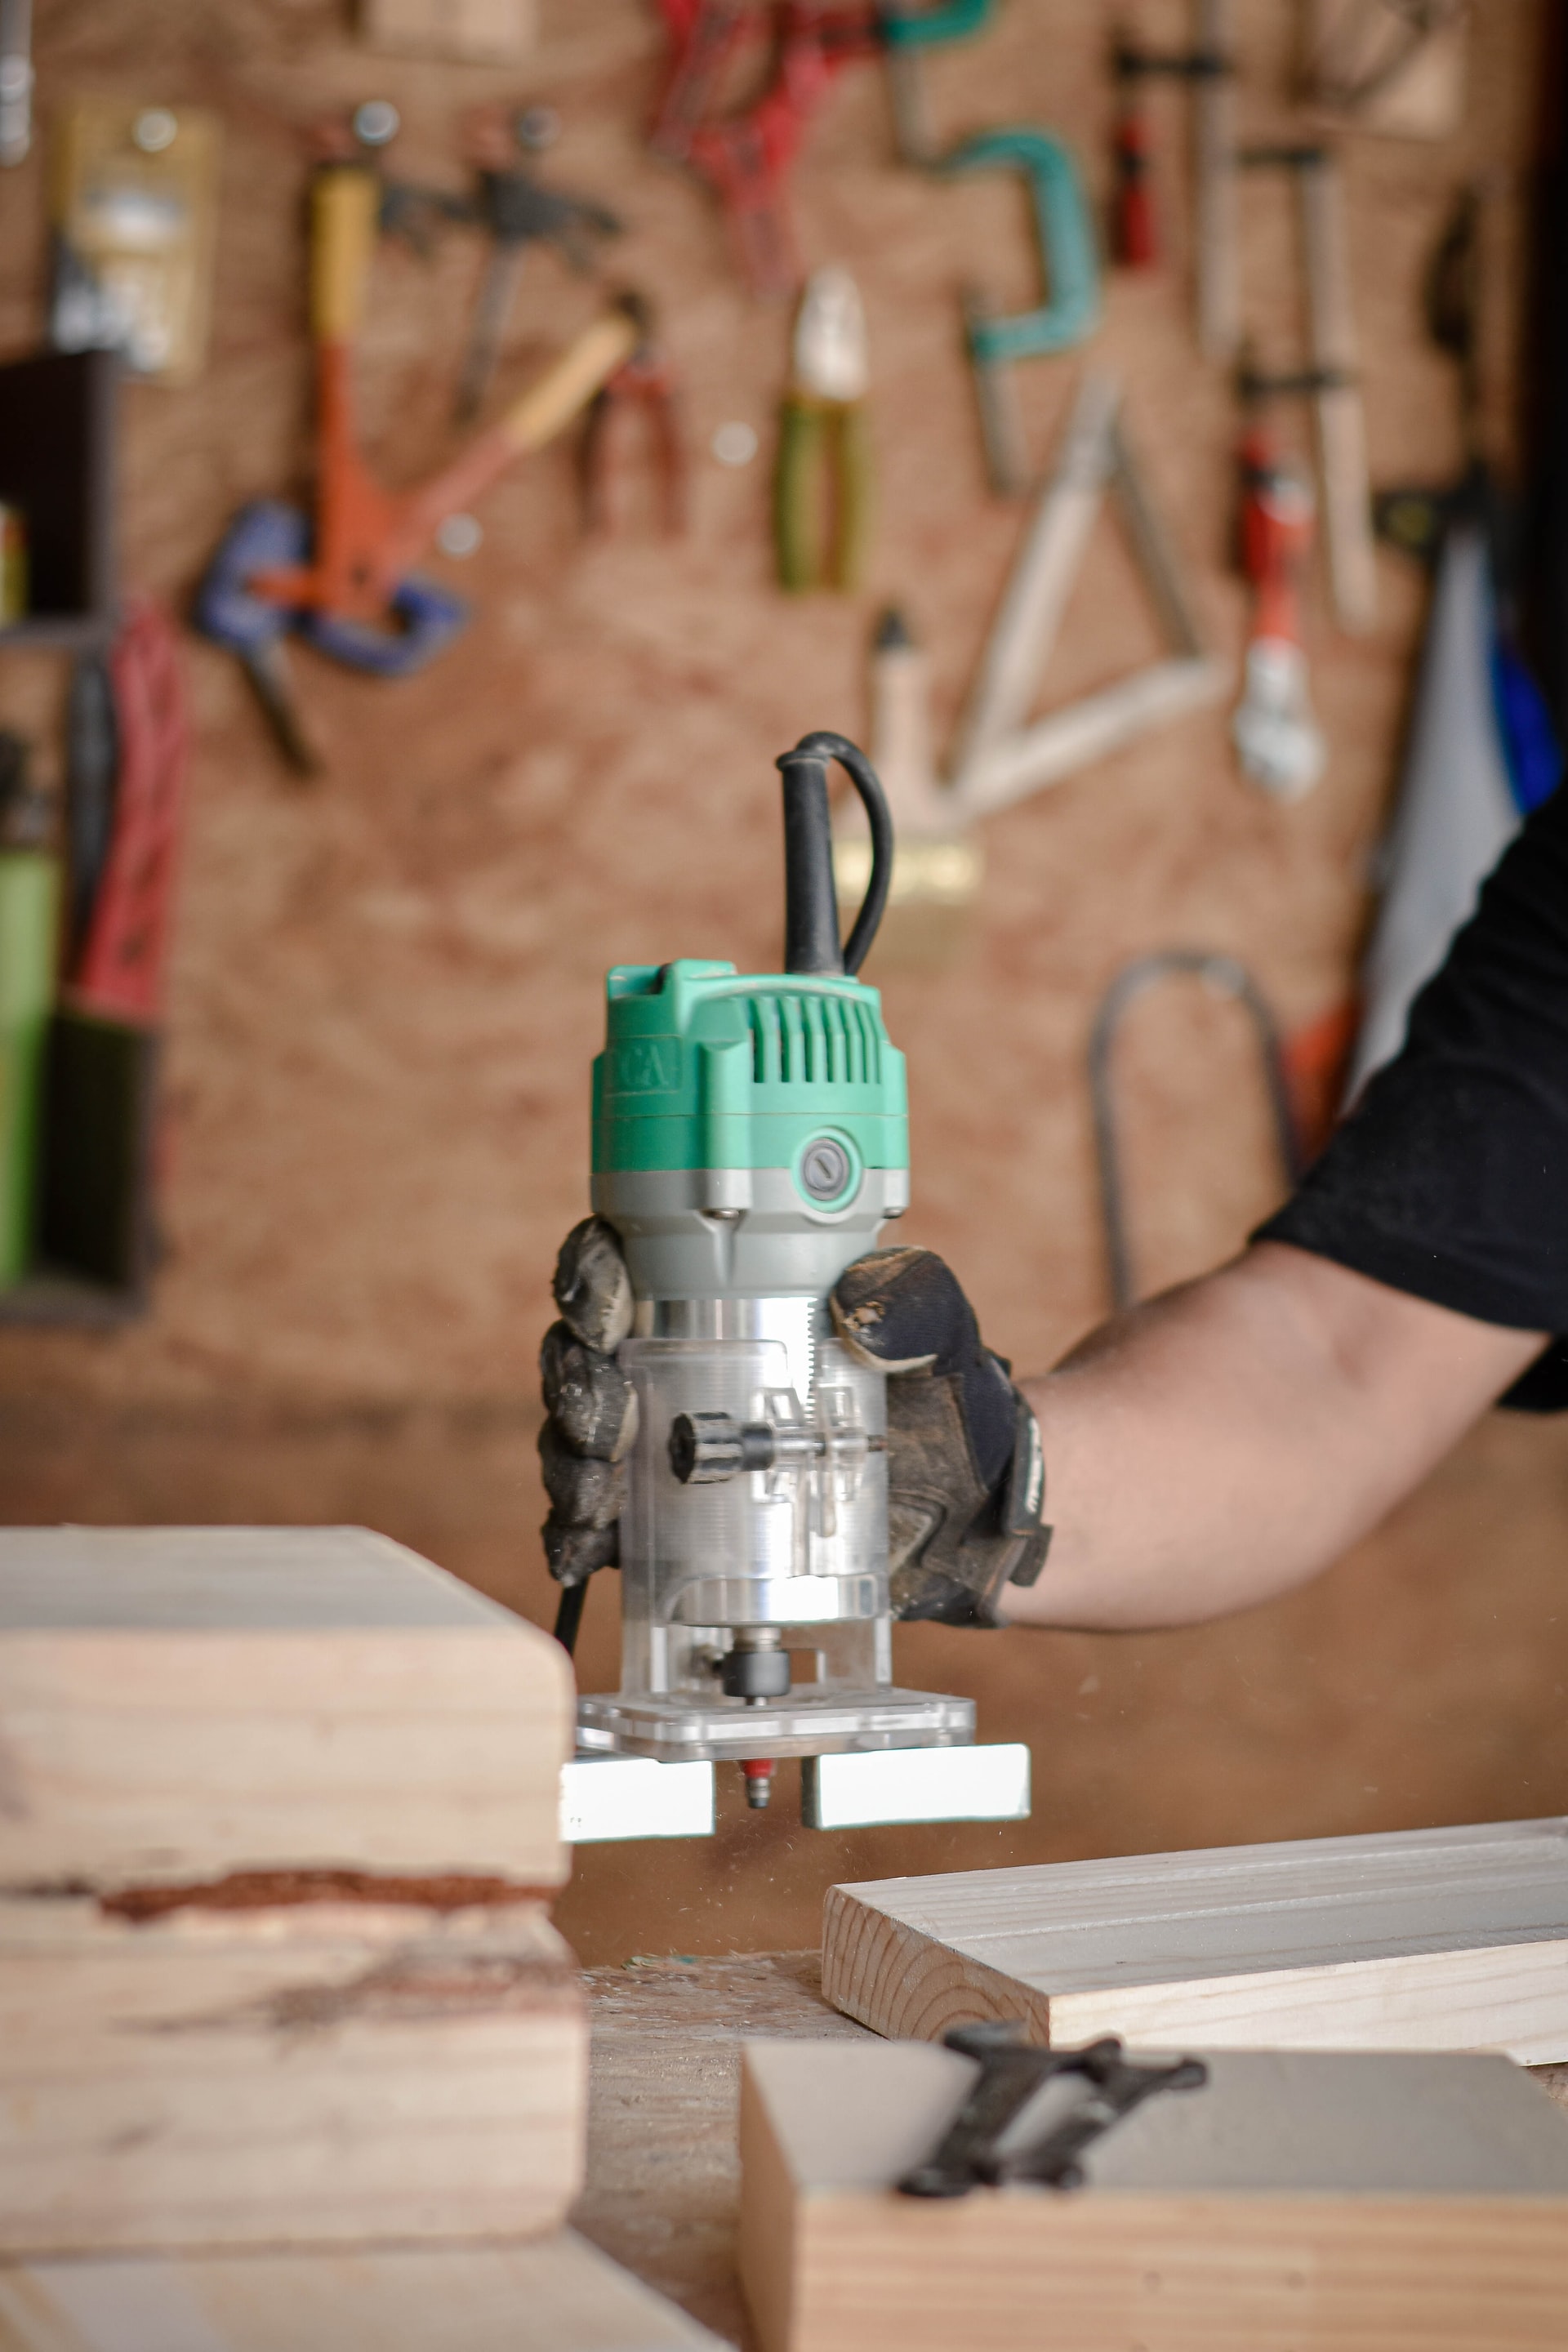 person holding green and gray power tool